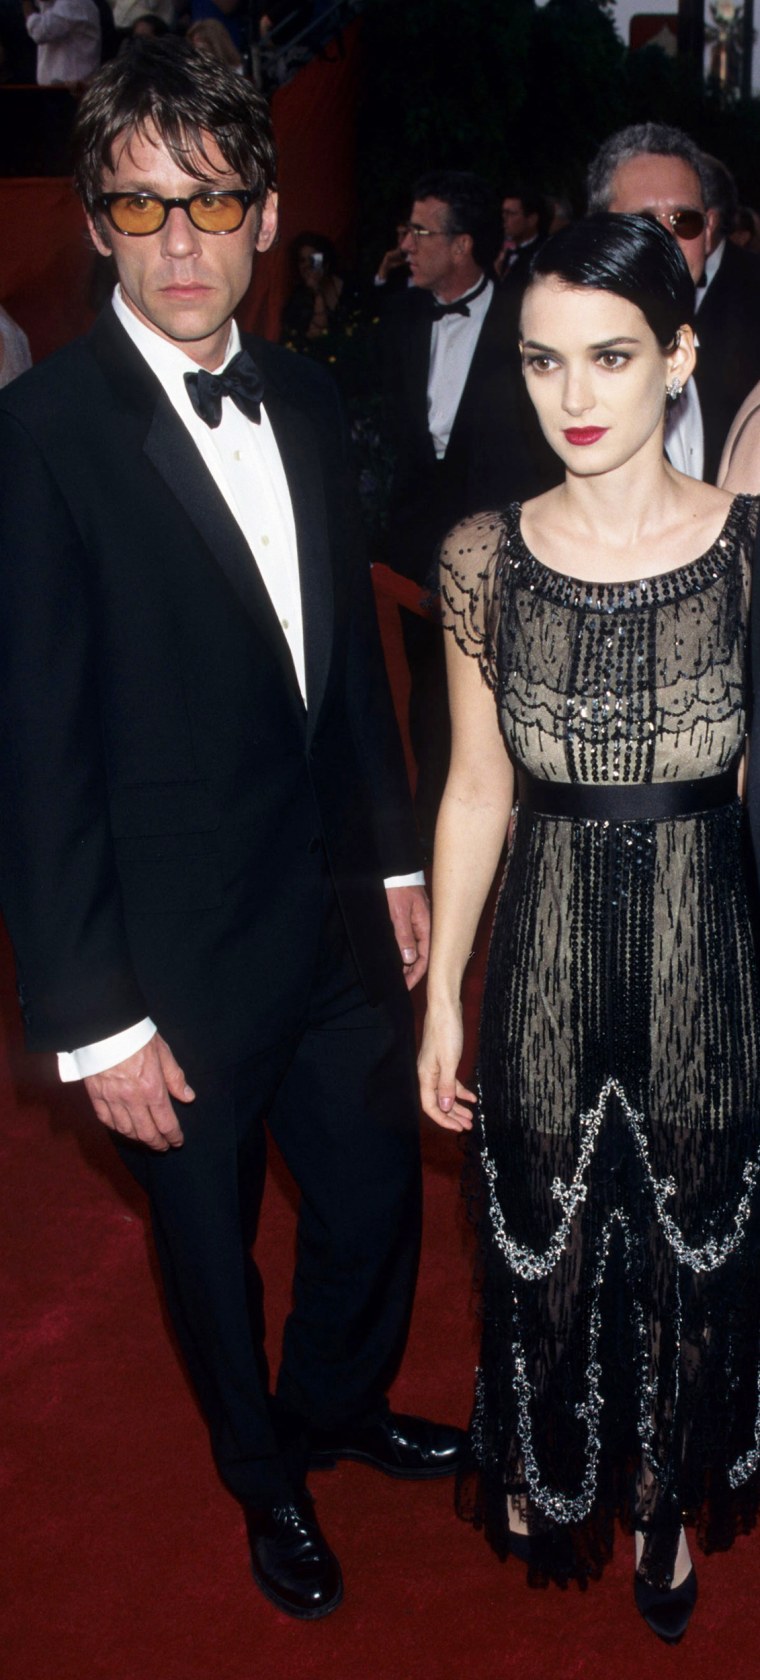 Winona Ryder and Kevin Healy